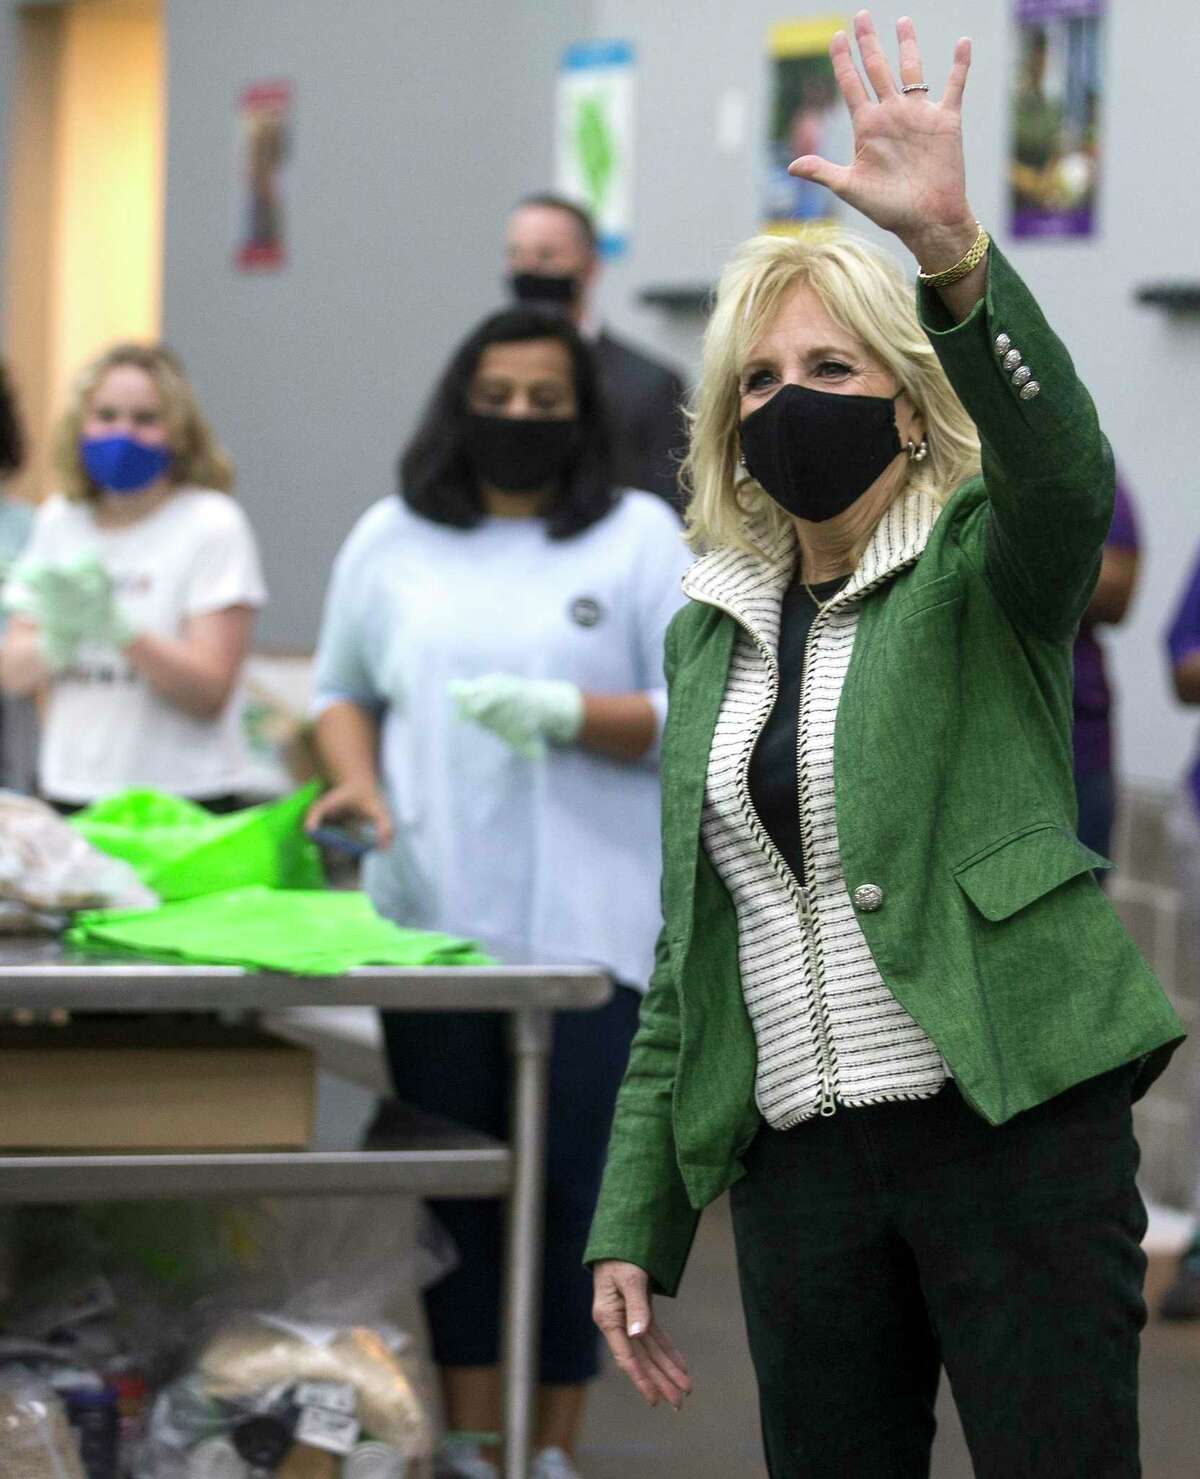 First Lady Jill Biden waves at volunteers as she arrives for a visit to the Houston Food Bank Friday, Feb. 26, 2021 in Houston.